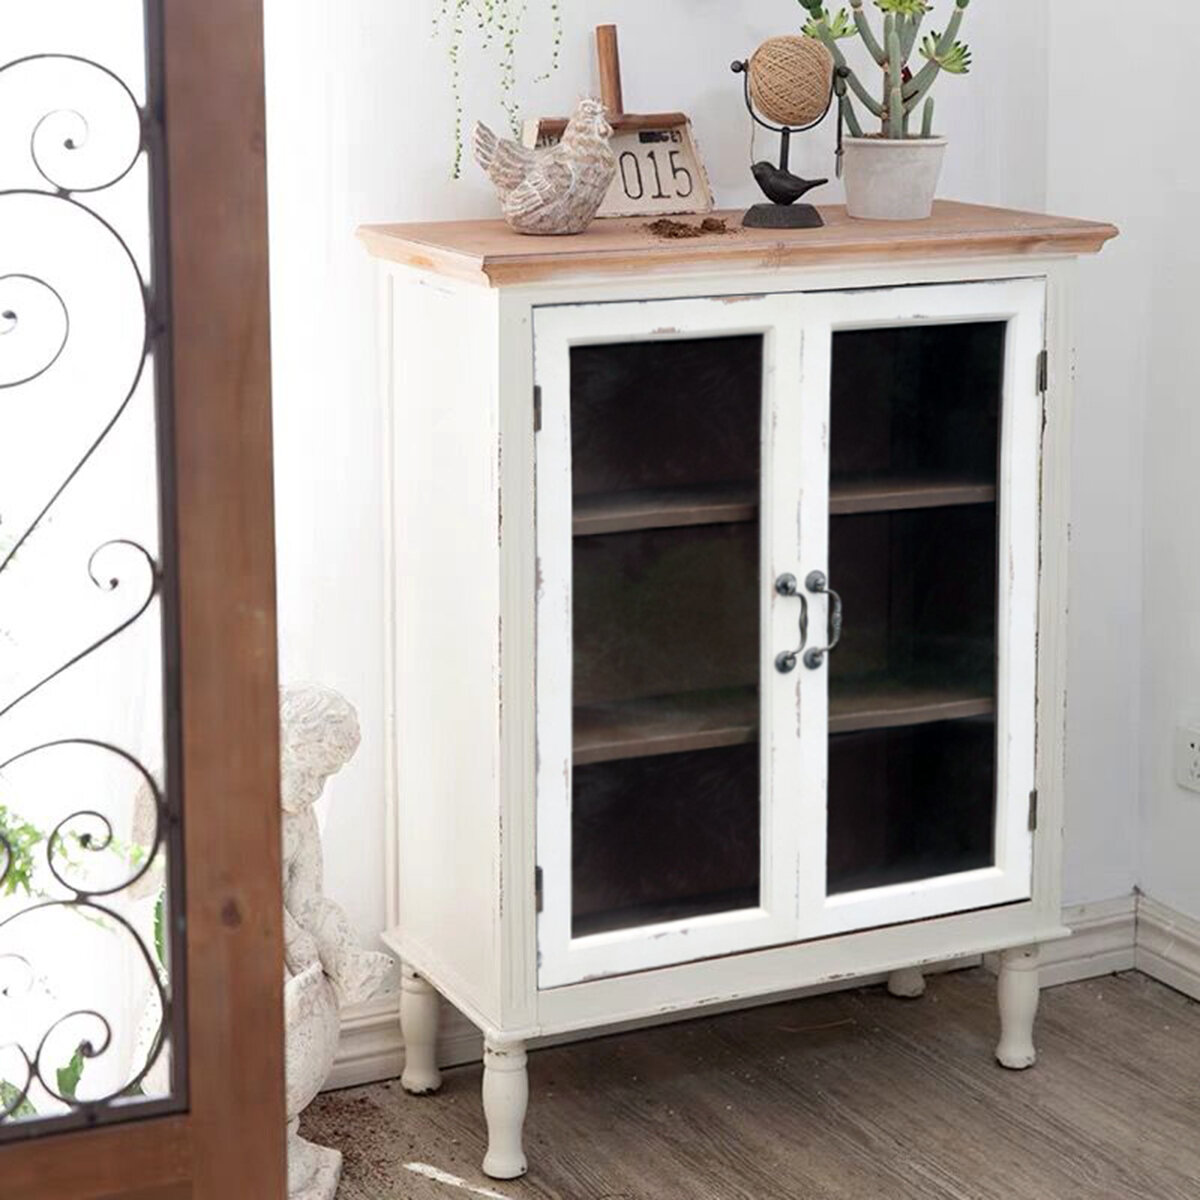 Cheungs Wood Hanging Storage Cabinet with Glass Doors